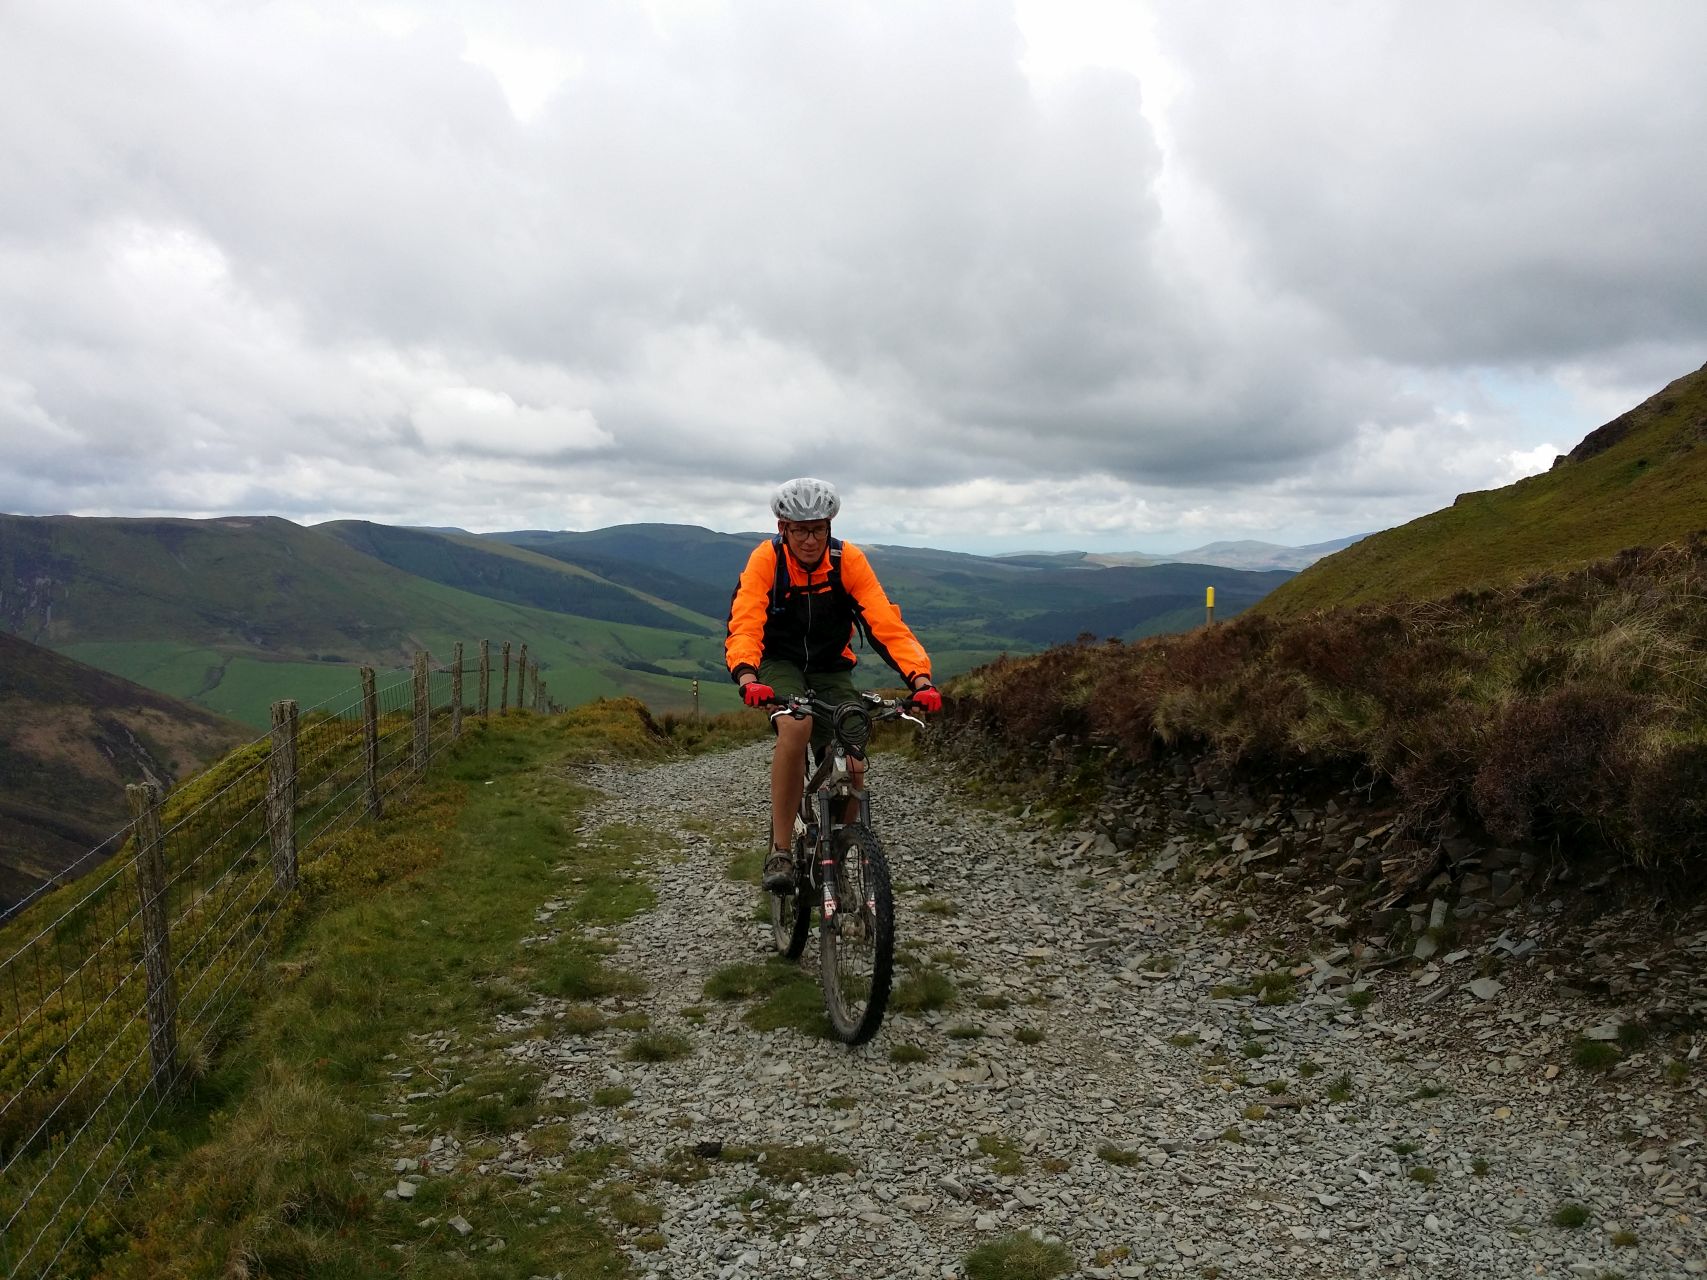 Day 4 - Paul riding up beneath slopes of Foel Fadian